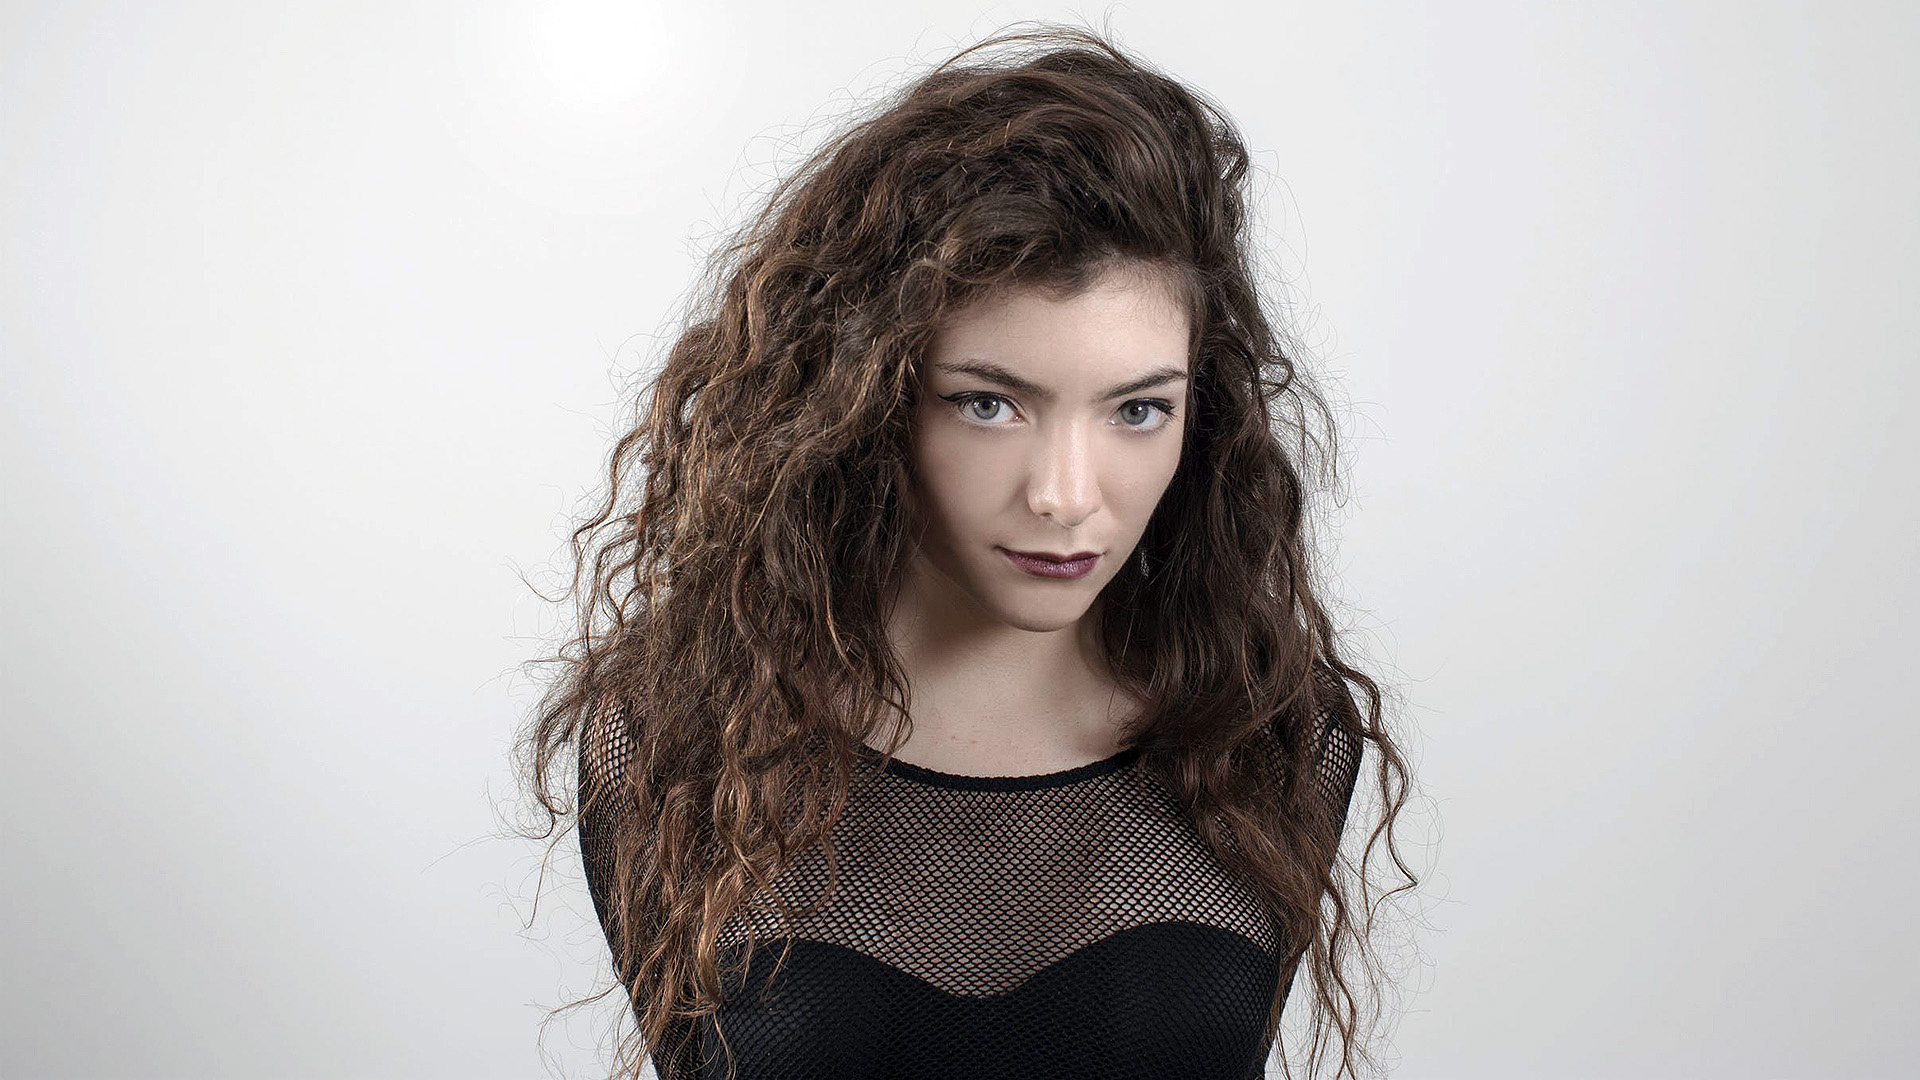 Lorde Wallpapers (43+ images inside)